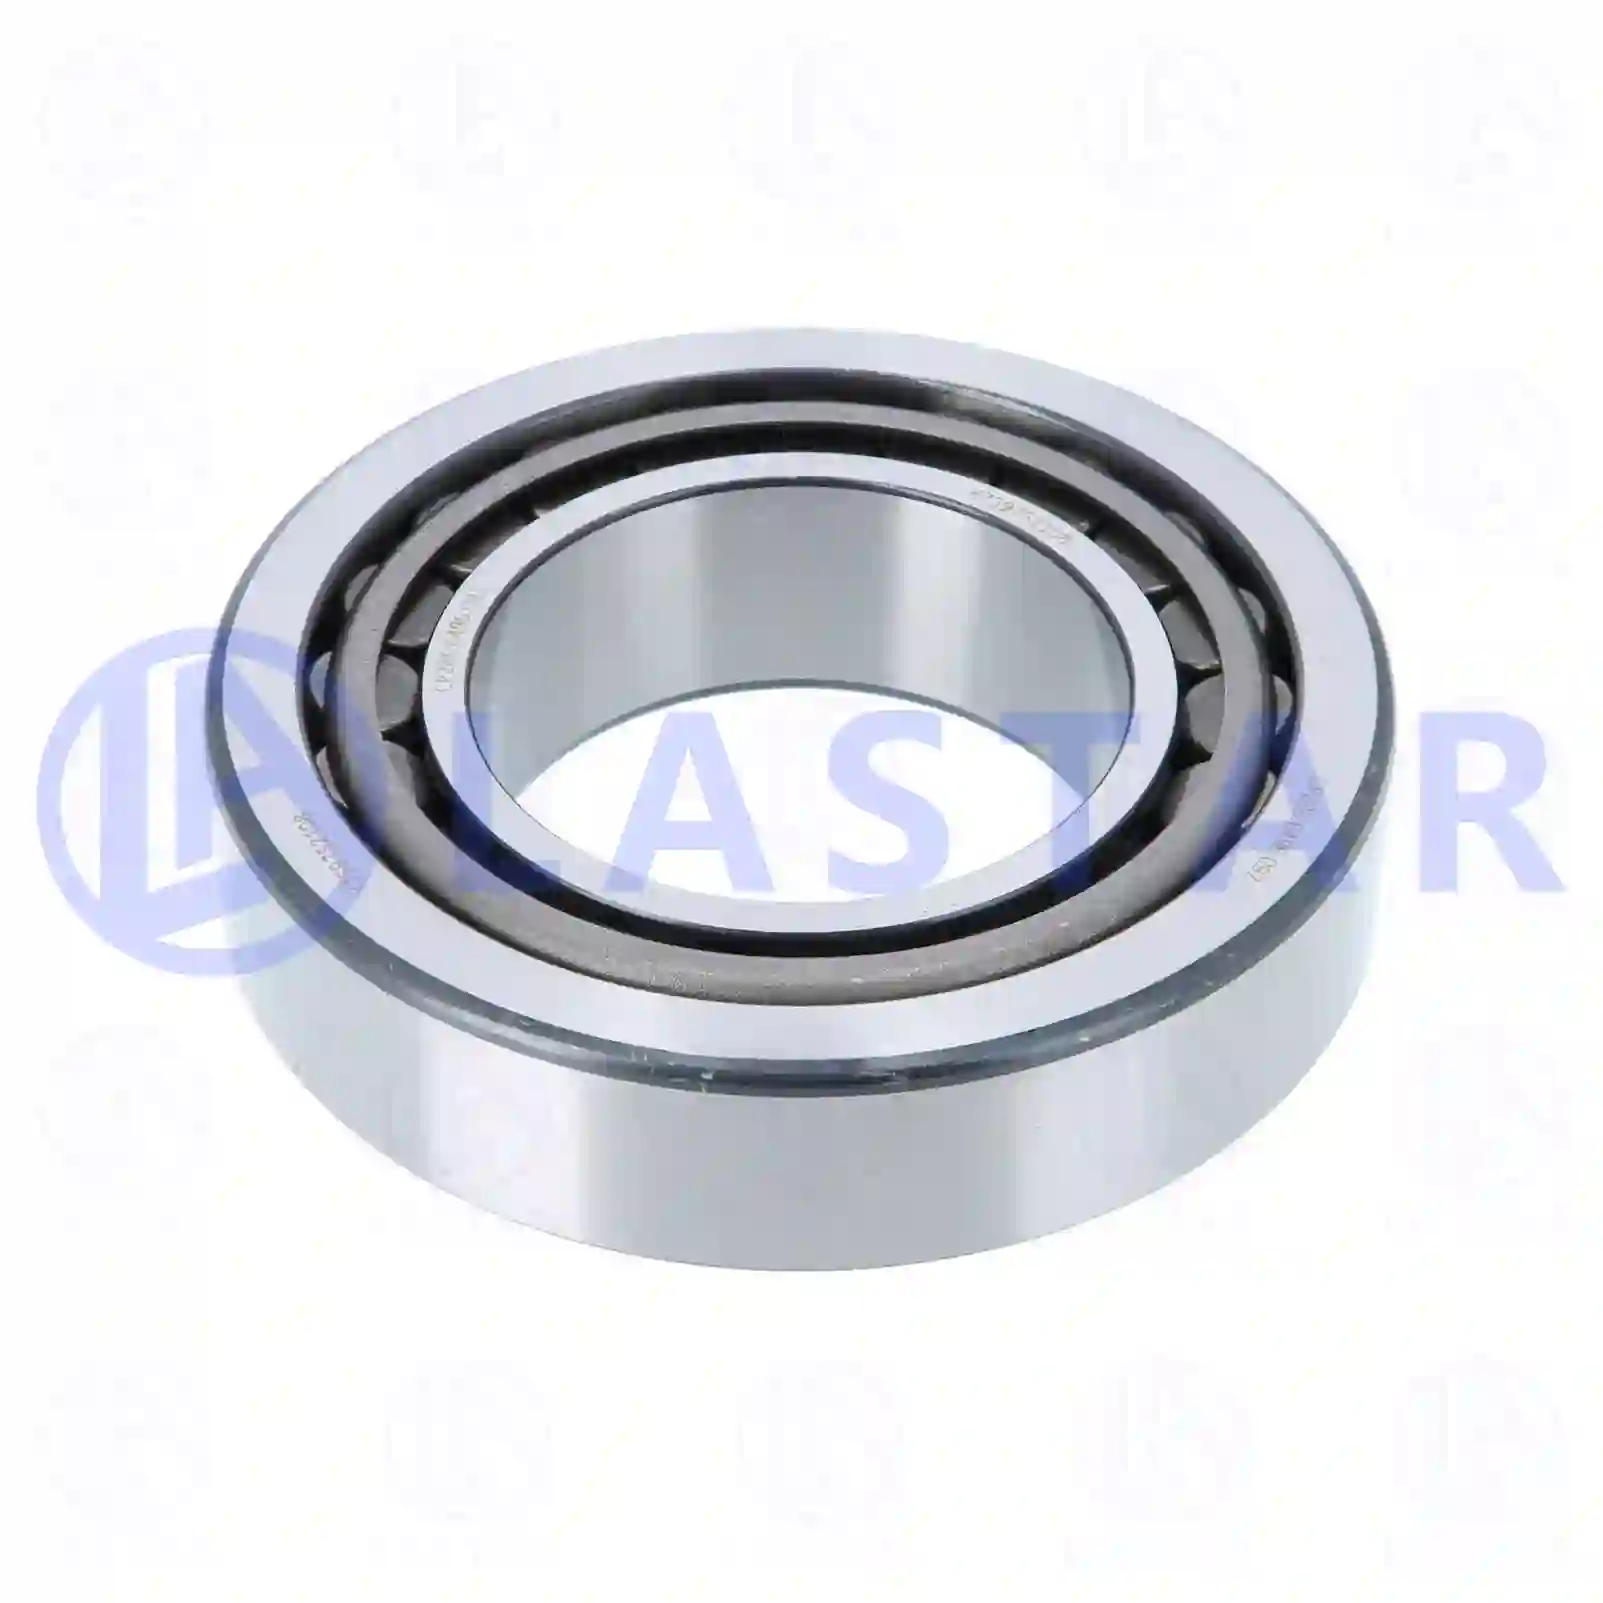 Bearings Tapered roller bearing, la no: 77724628 ,  oem no:410707, 6387762, 99041057, 94060944, 1-09812079-0, 1-09812196-0, 9-00093115-0, 00564707, 01905353, 26800240, 3612949000, 99041057, 06324990008, 000720032218, 0345245000, 38325-90010, 0023432218, 0959232218, 0959532218, 5000021842, 4200002700, 14835, EN3612949, 6691161000, 324717045000, 19468 Lastar Spare Part | Truck Spare Parts, Auotomotive Spare Parts